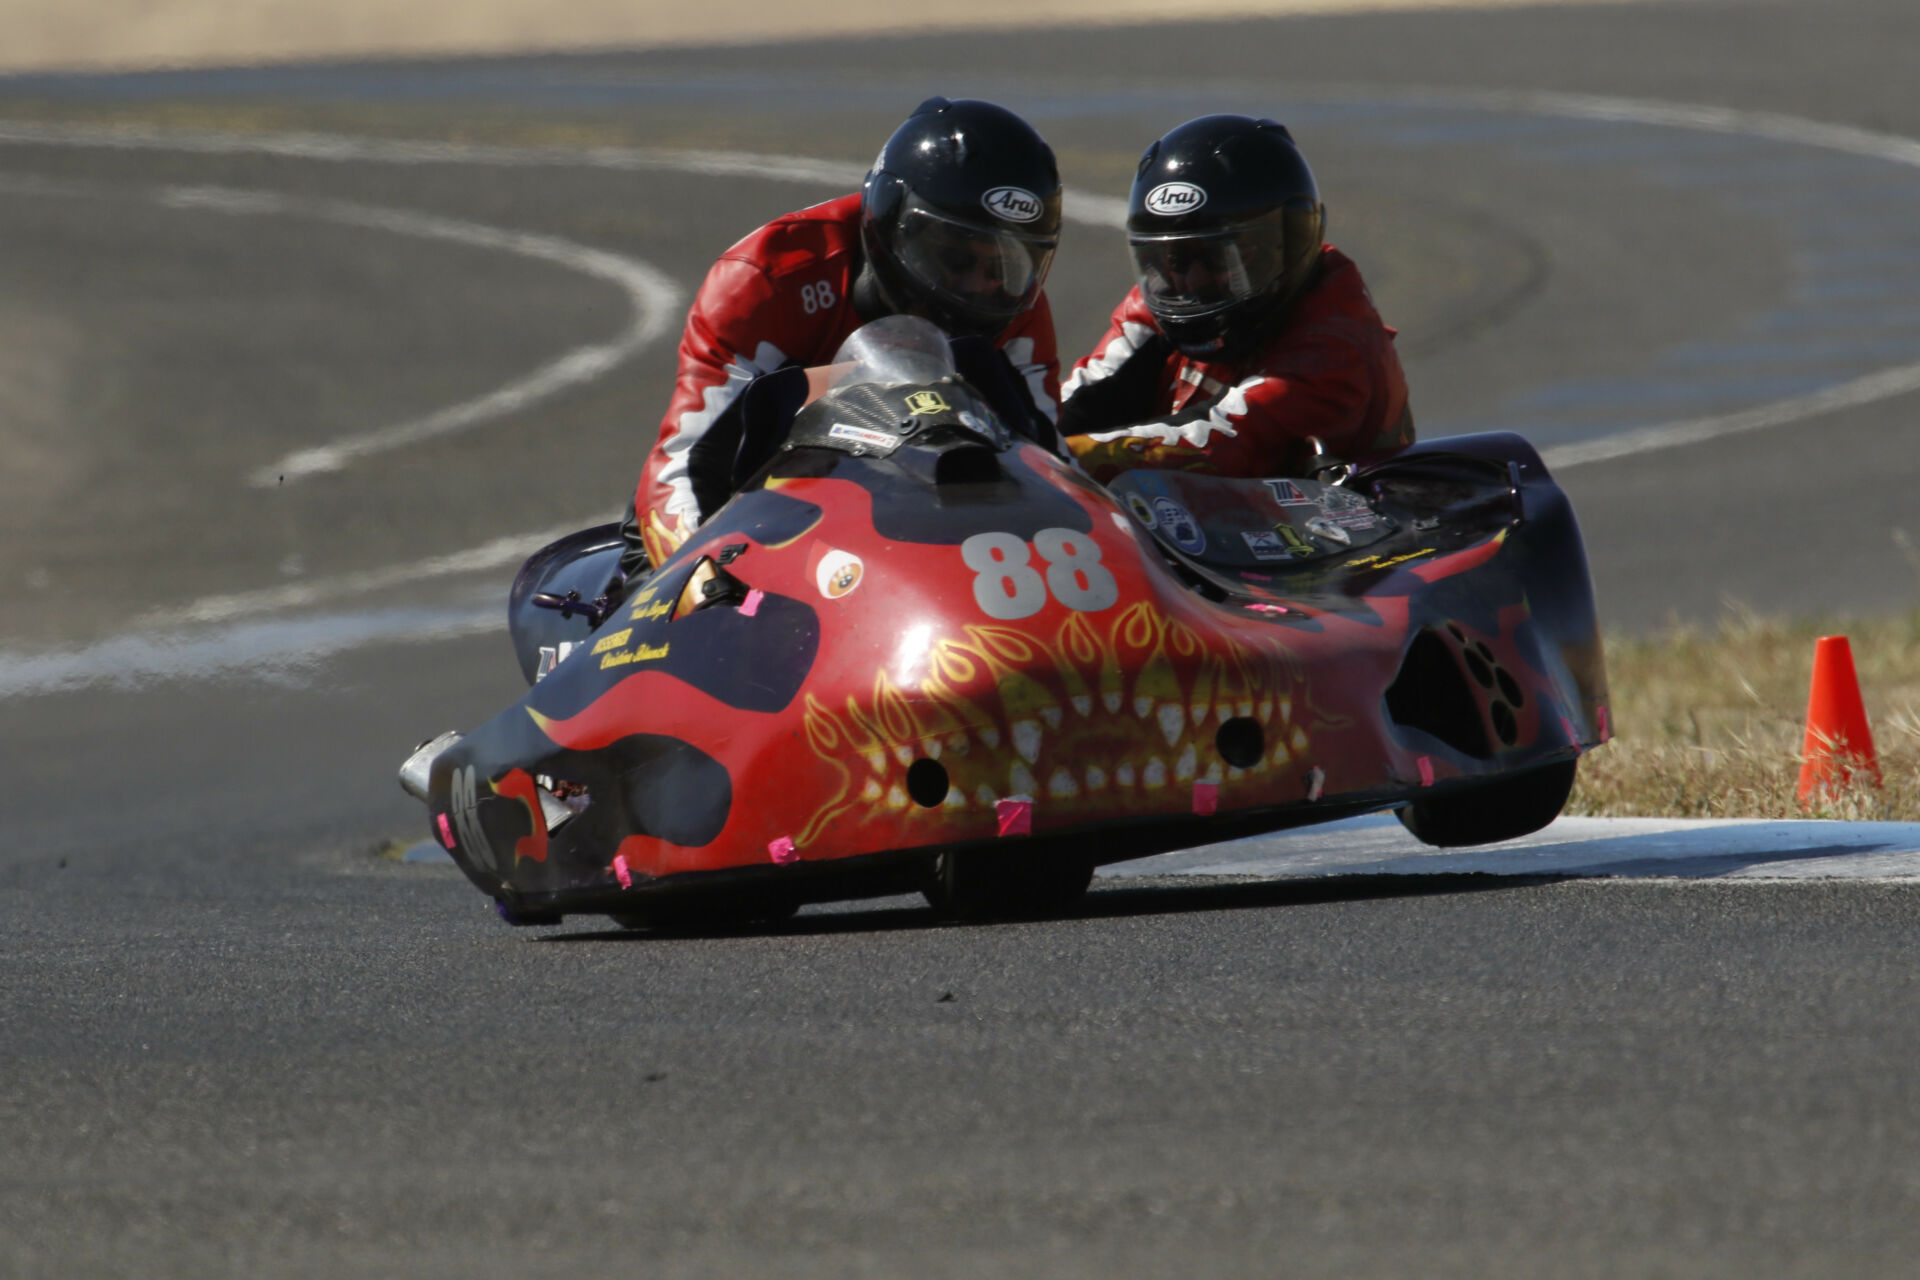 Wade Boyd (88) and passenger Eric Lindauer at speed on their sidecar rig during the AHRMA event at Thunderhill Raceway Park. Photo by Oxymoron Photography, courtesy AHRMA.